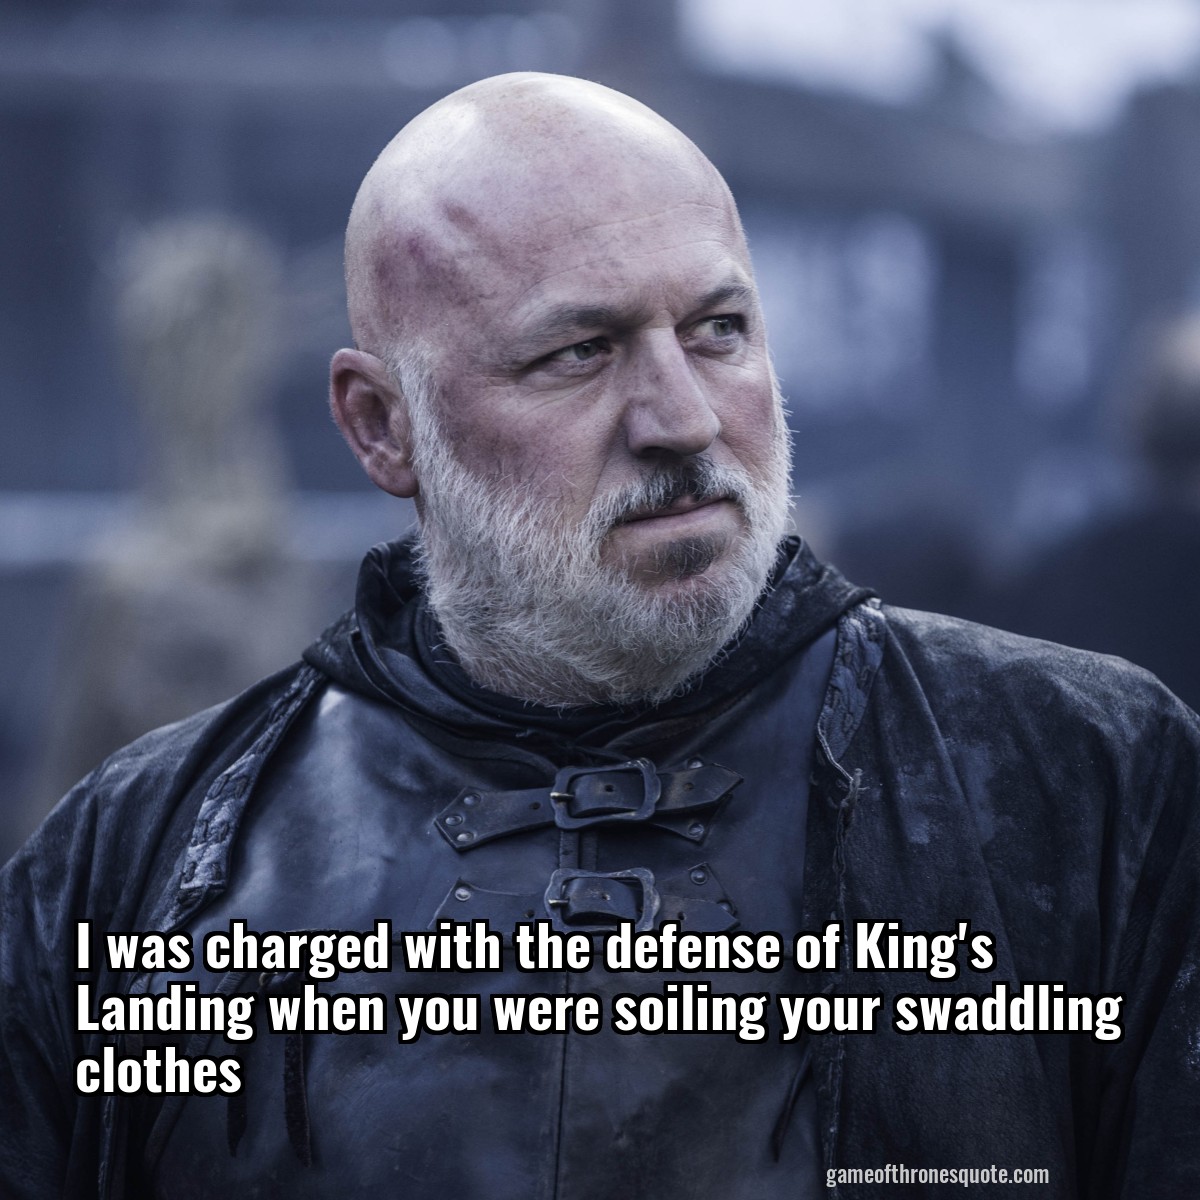 I was charged with the defense of King's Landing when you were soiling your swaddling clothes